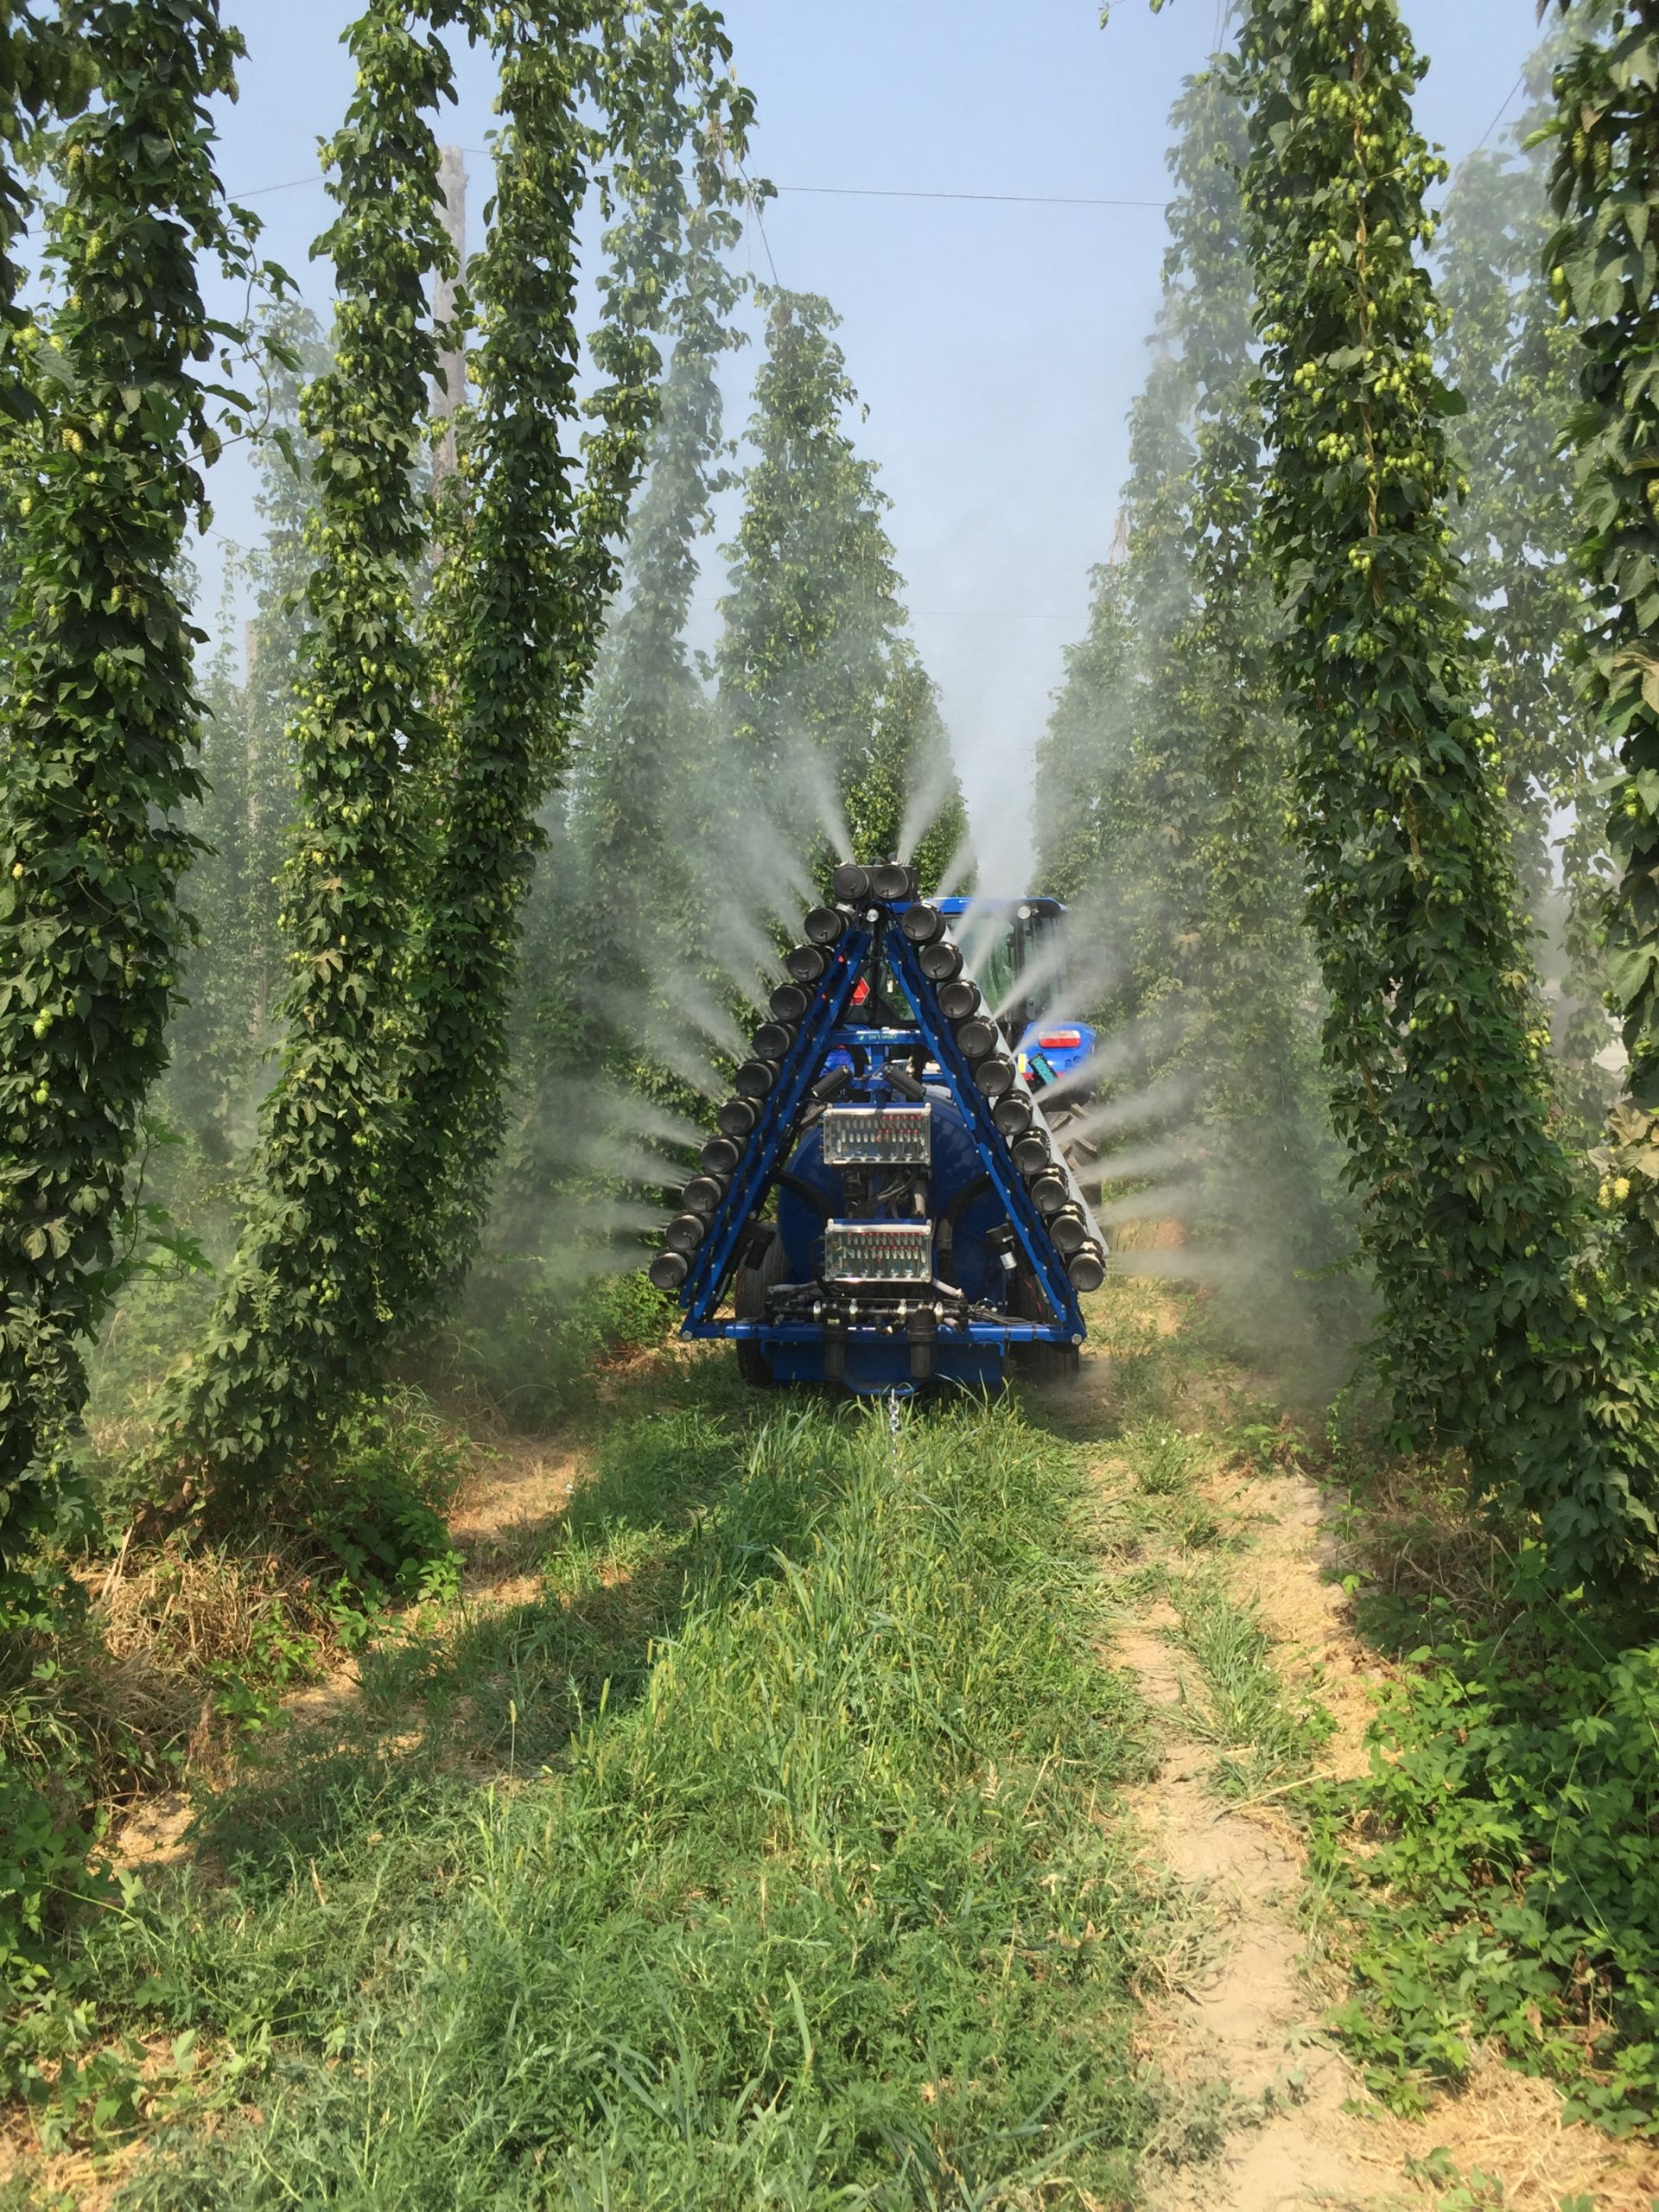 OnTarget LPA fixed sprayer spraying down a row of hops vines on a clear day